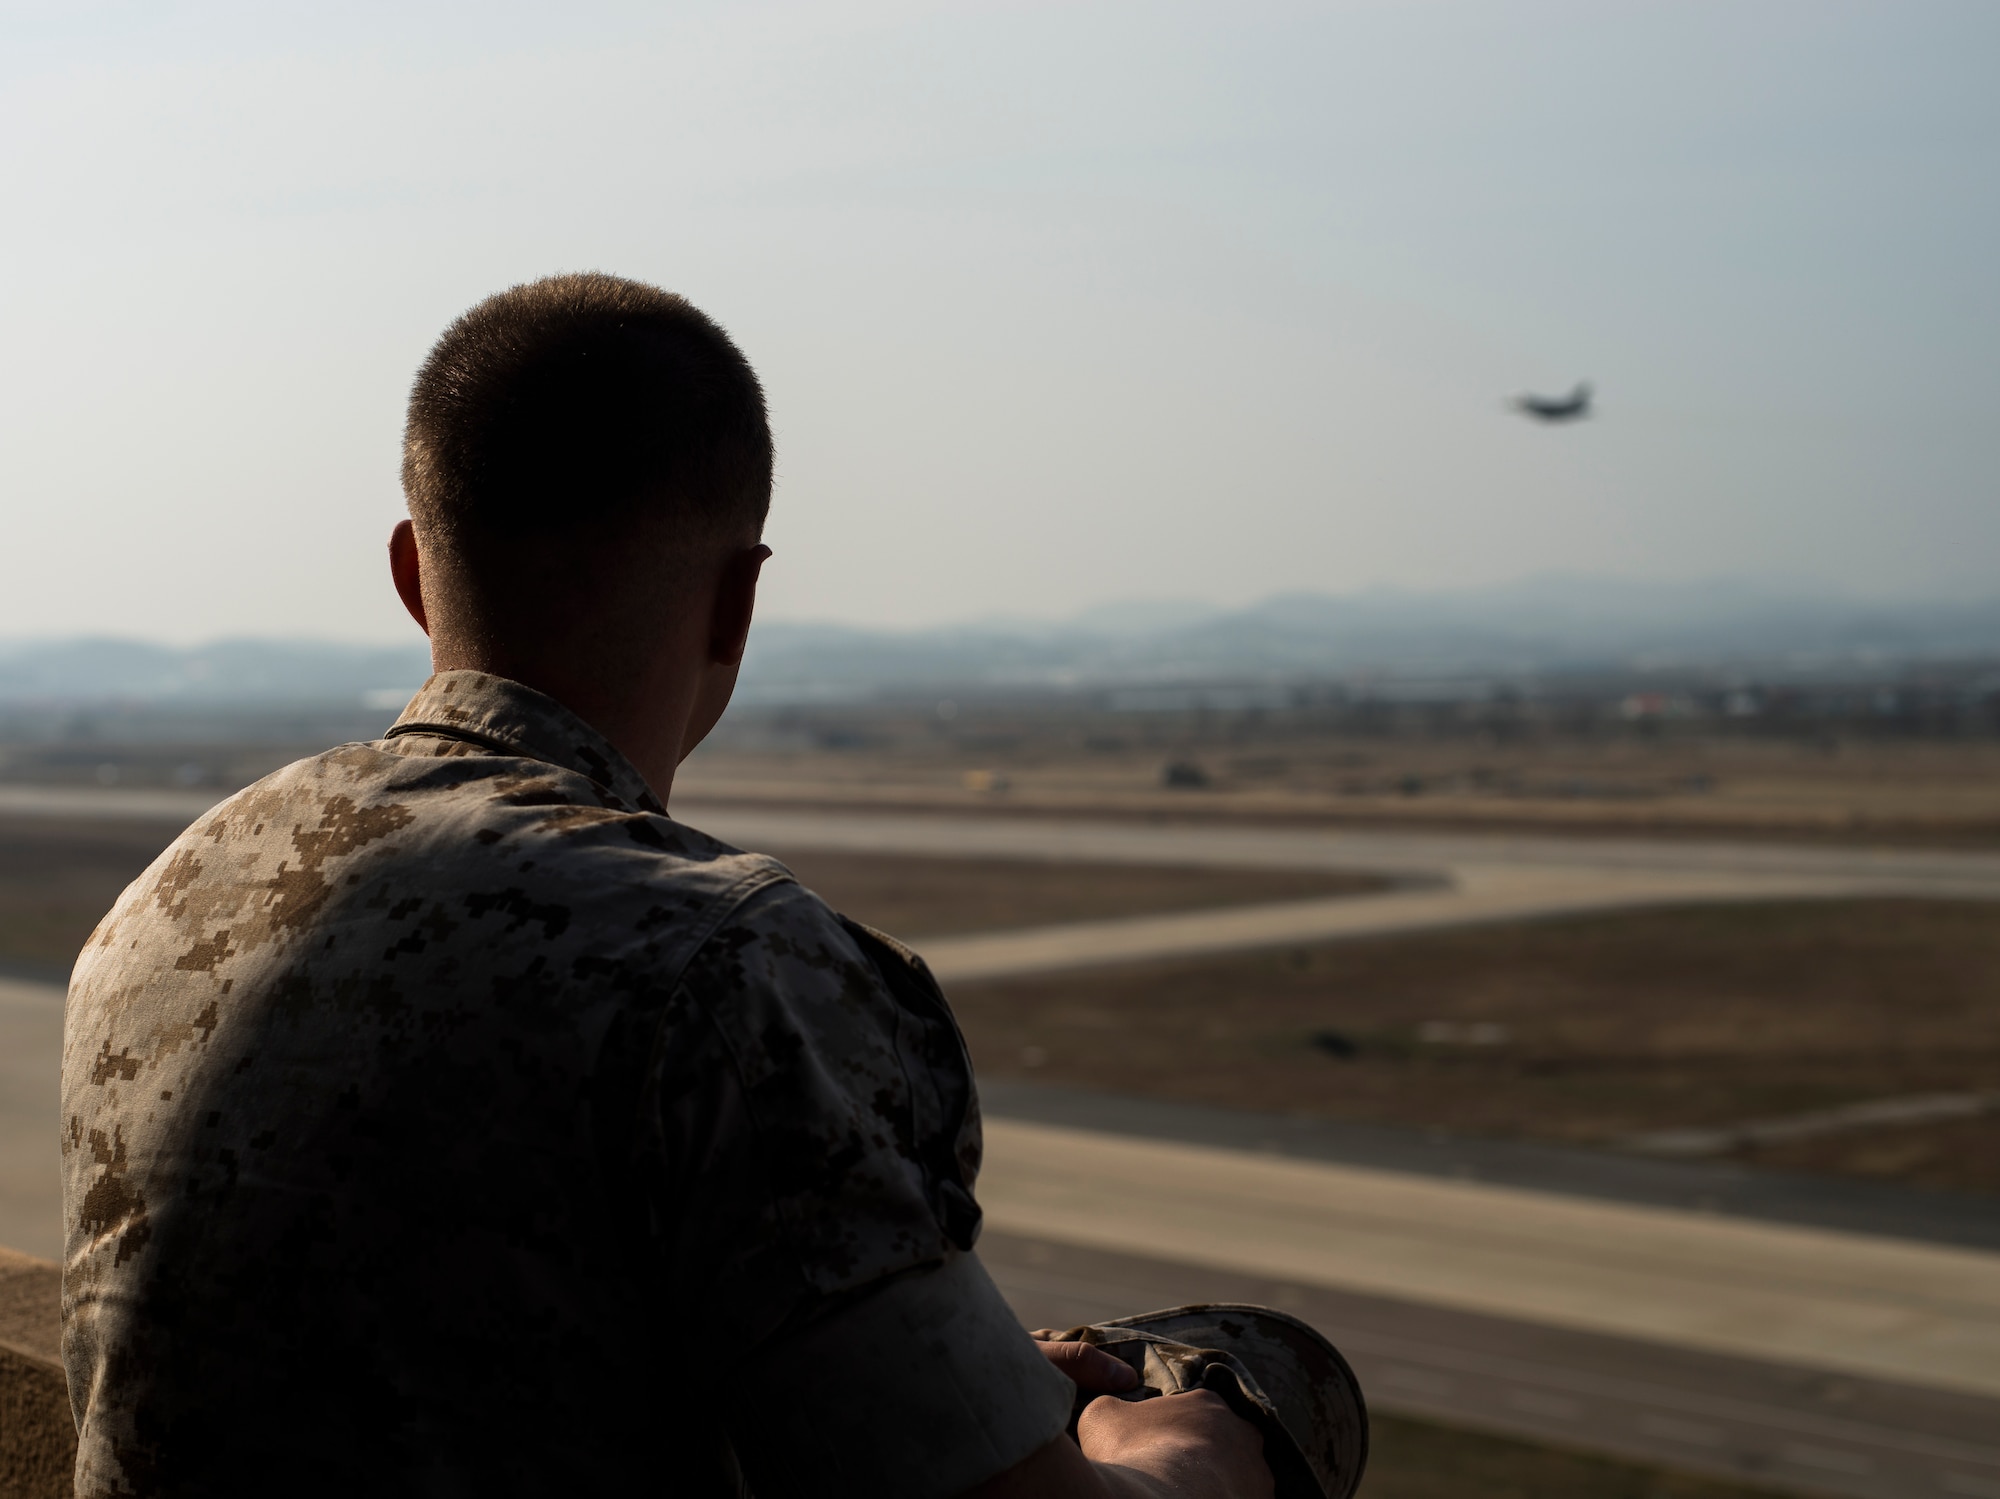 Marine Corps Cpl. Jake Balcom watches an F-16 Fighting Falcon take off March 26, 2014, at Osan Air Base, Republic of Korea. Balcom's grandfather, Col. Ralph Balcom, served as a fighter pilot in Vietnam, but has been missing in action since May 15, 1966. (U.S. Air Force photo/Staff Sgt. Jake Barreiro)